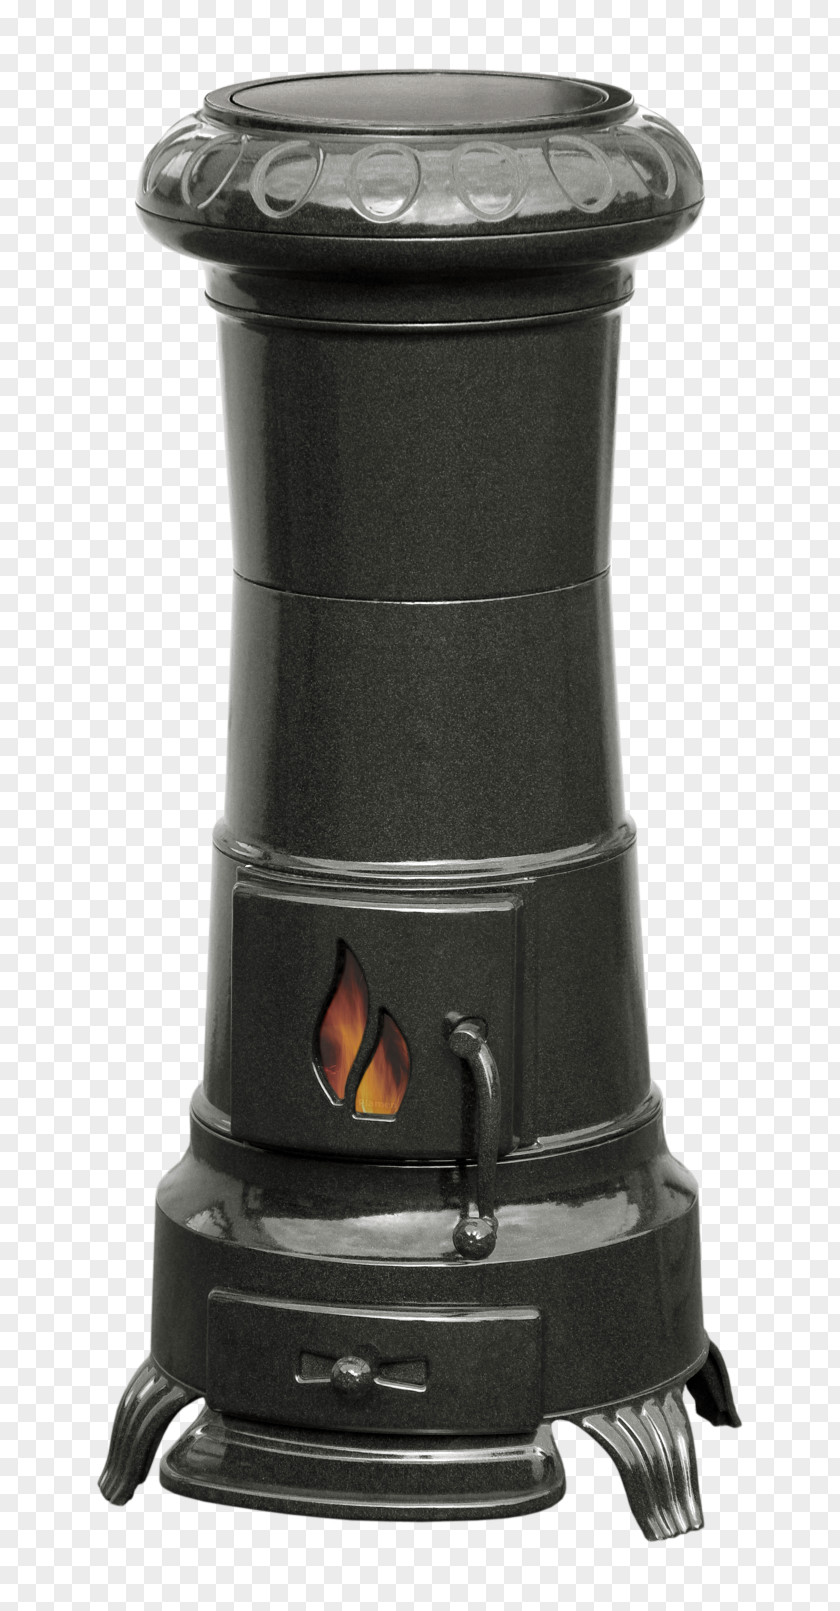 Oven Central Heating Plamen Flame Fireplace PNG